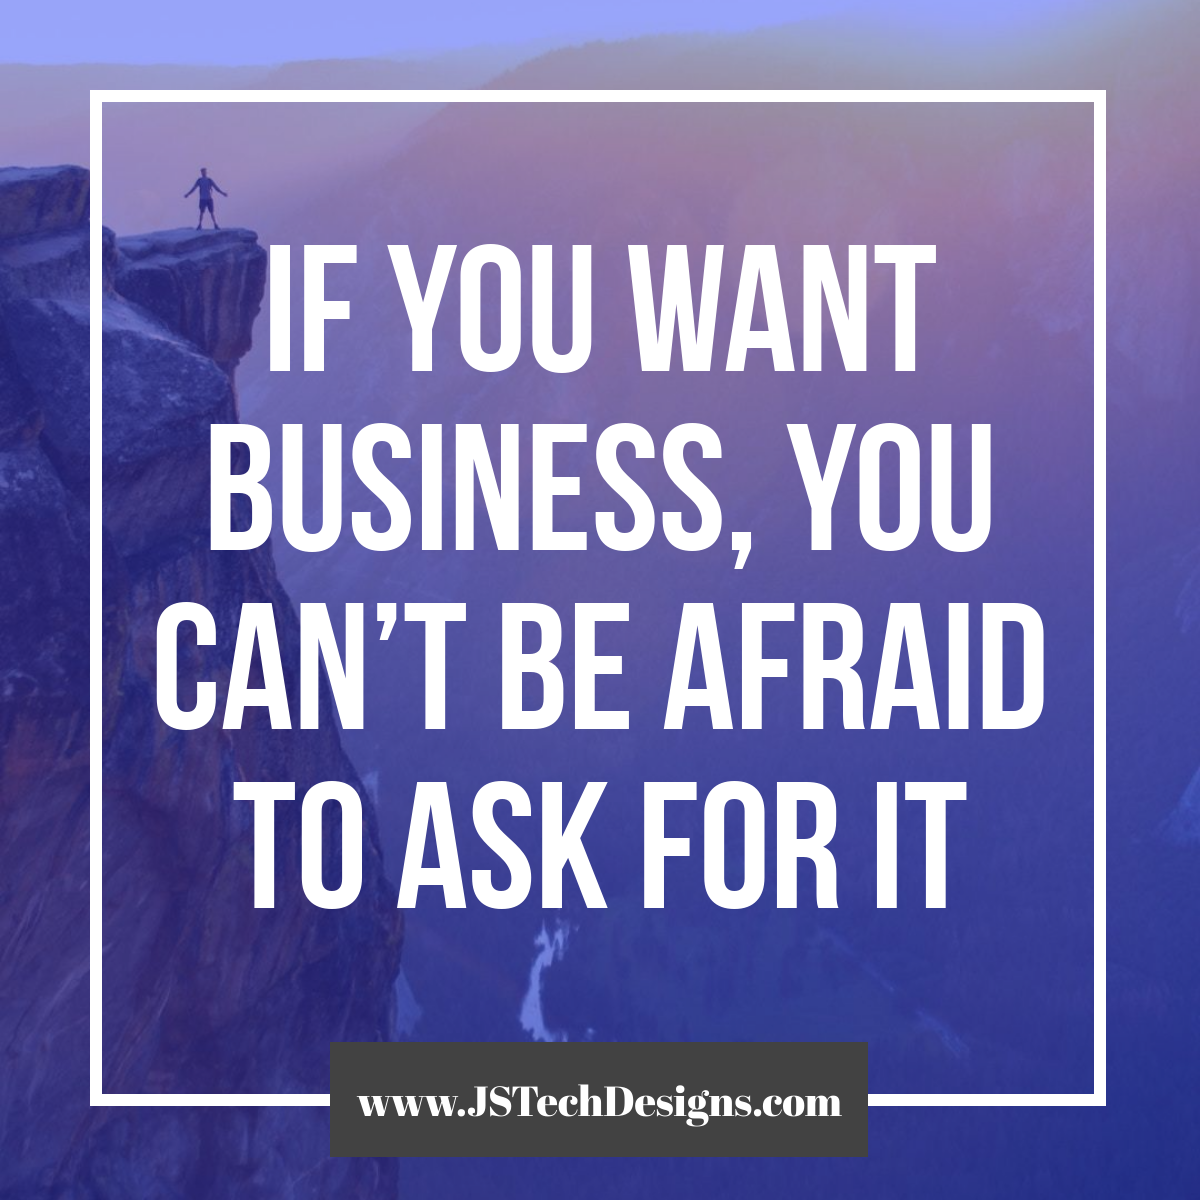 If You Want Business, You Can’t Be Afraid to Ask for It